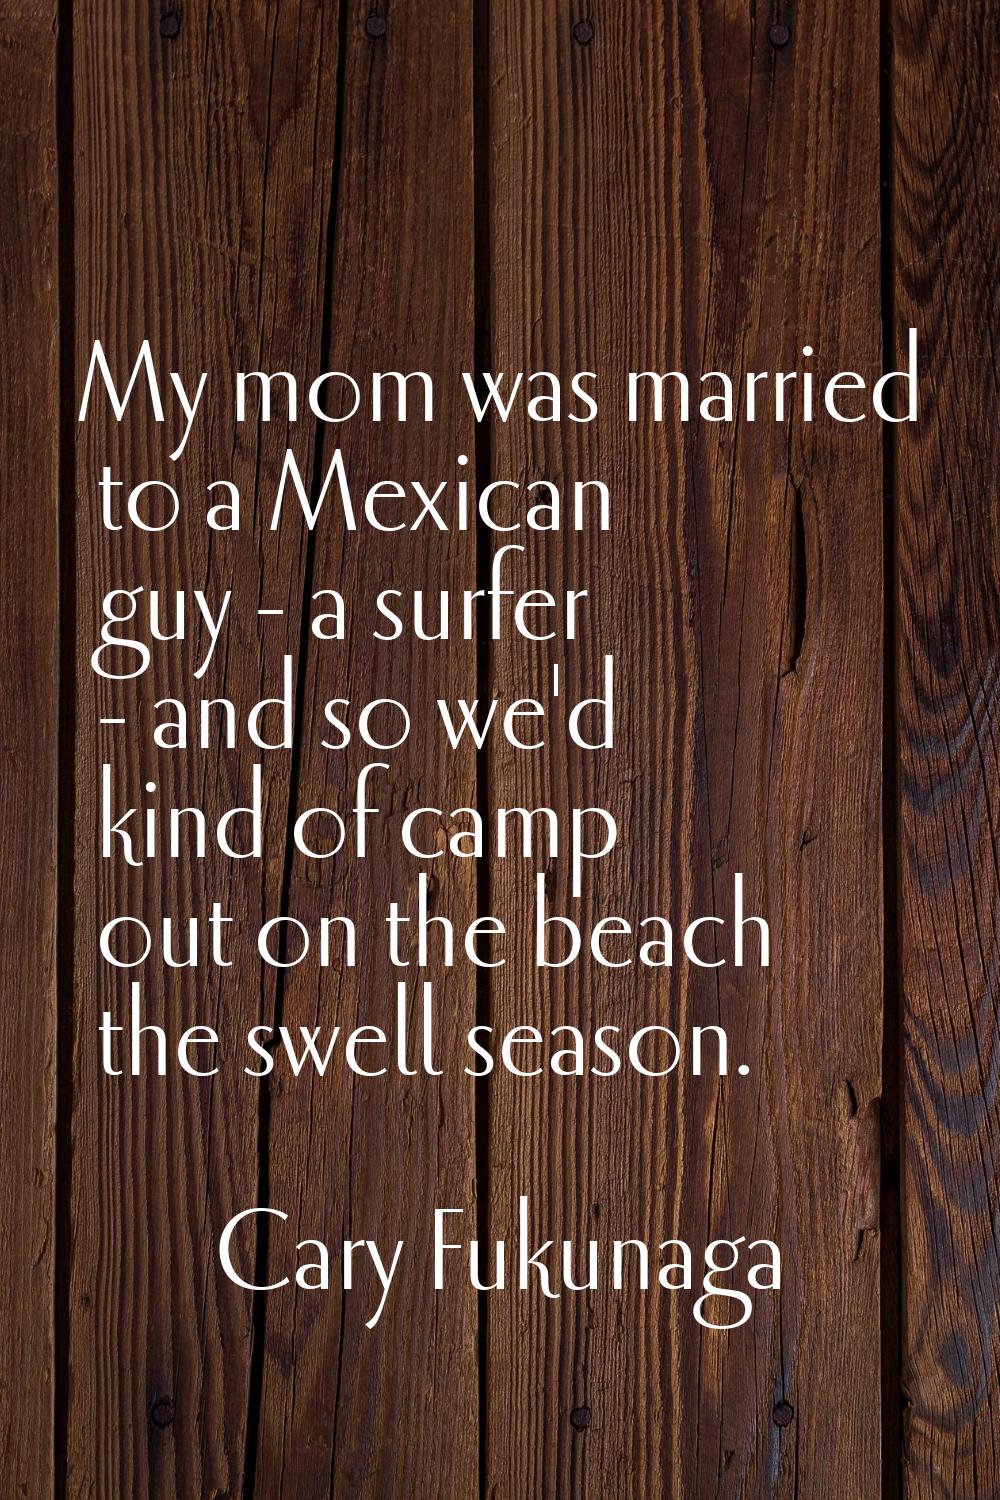 My mom was married to a Mexican guy - a surfer - and so we'd kind of camp out on the beach the swel